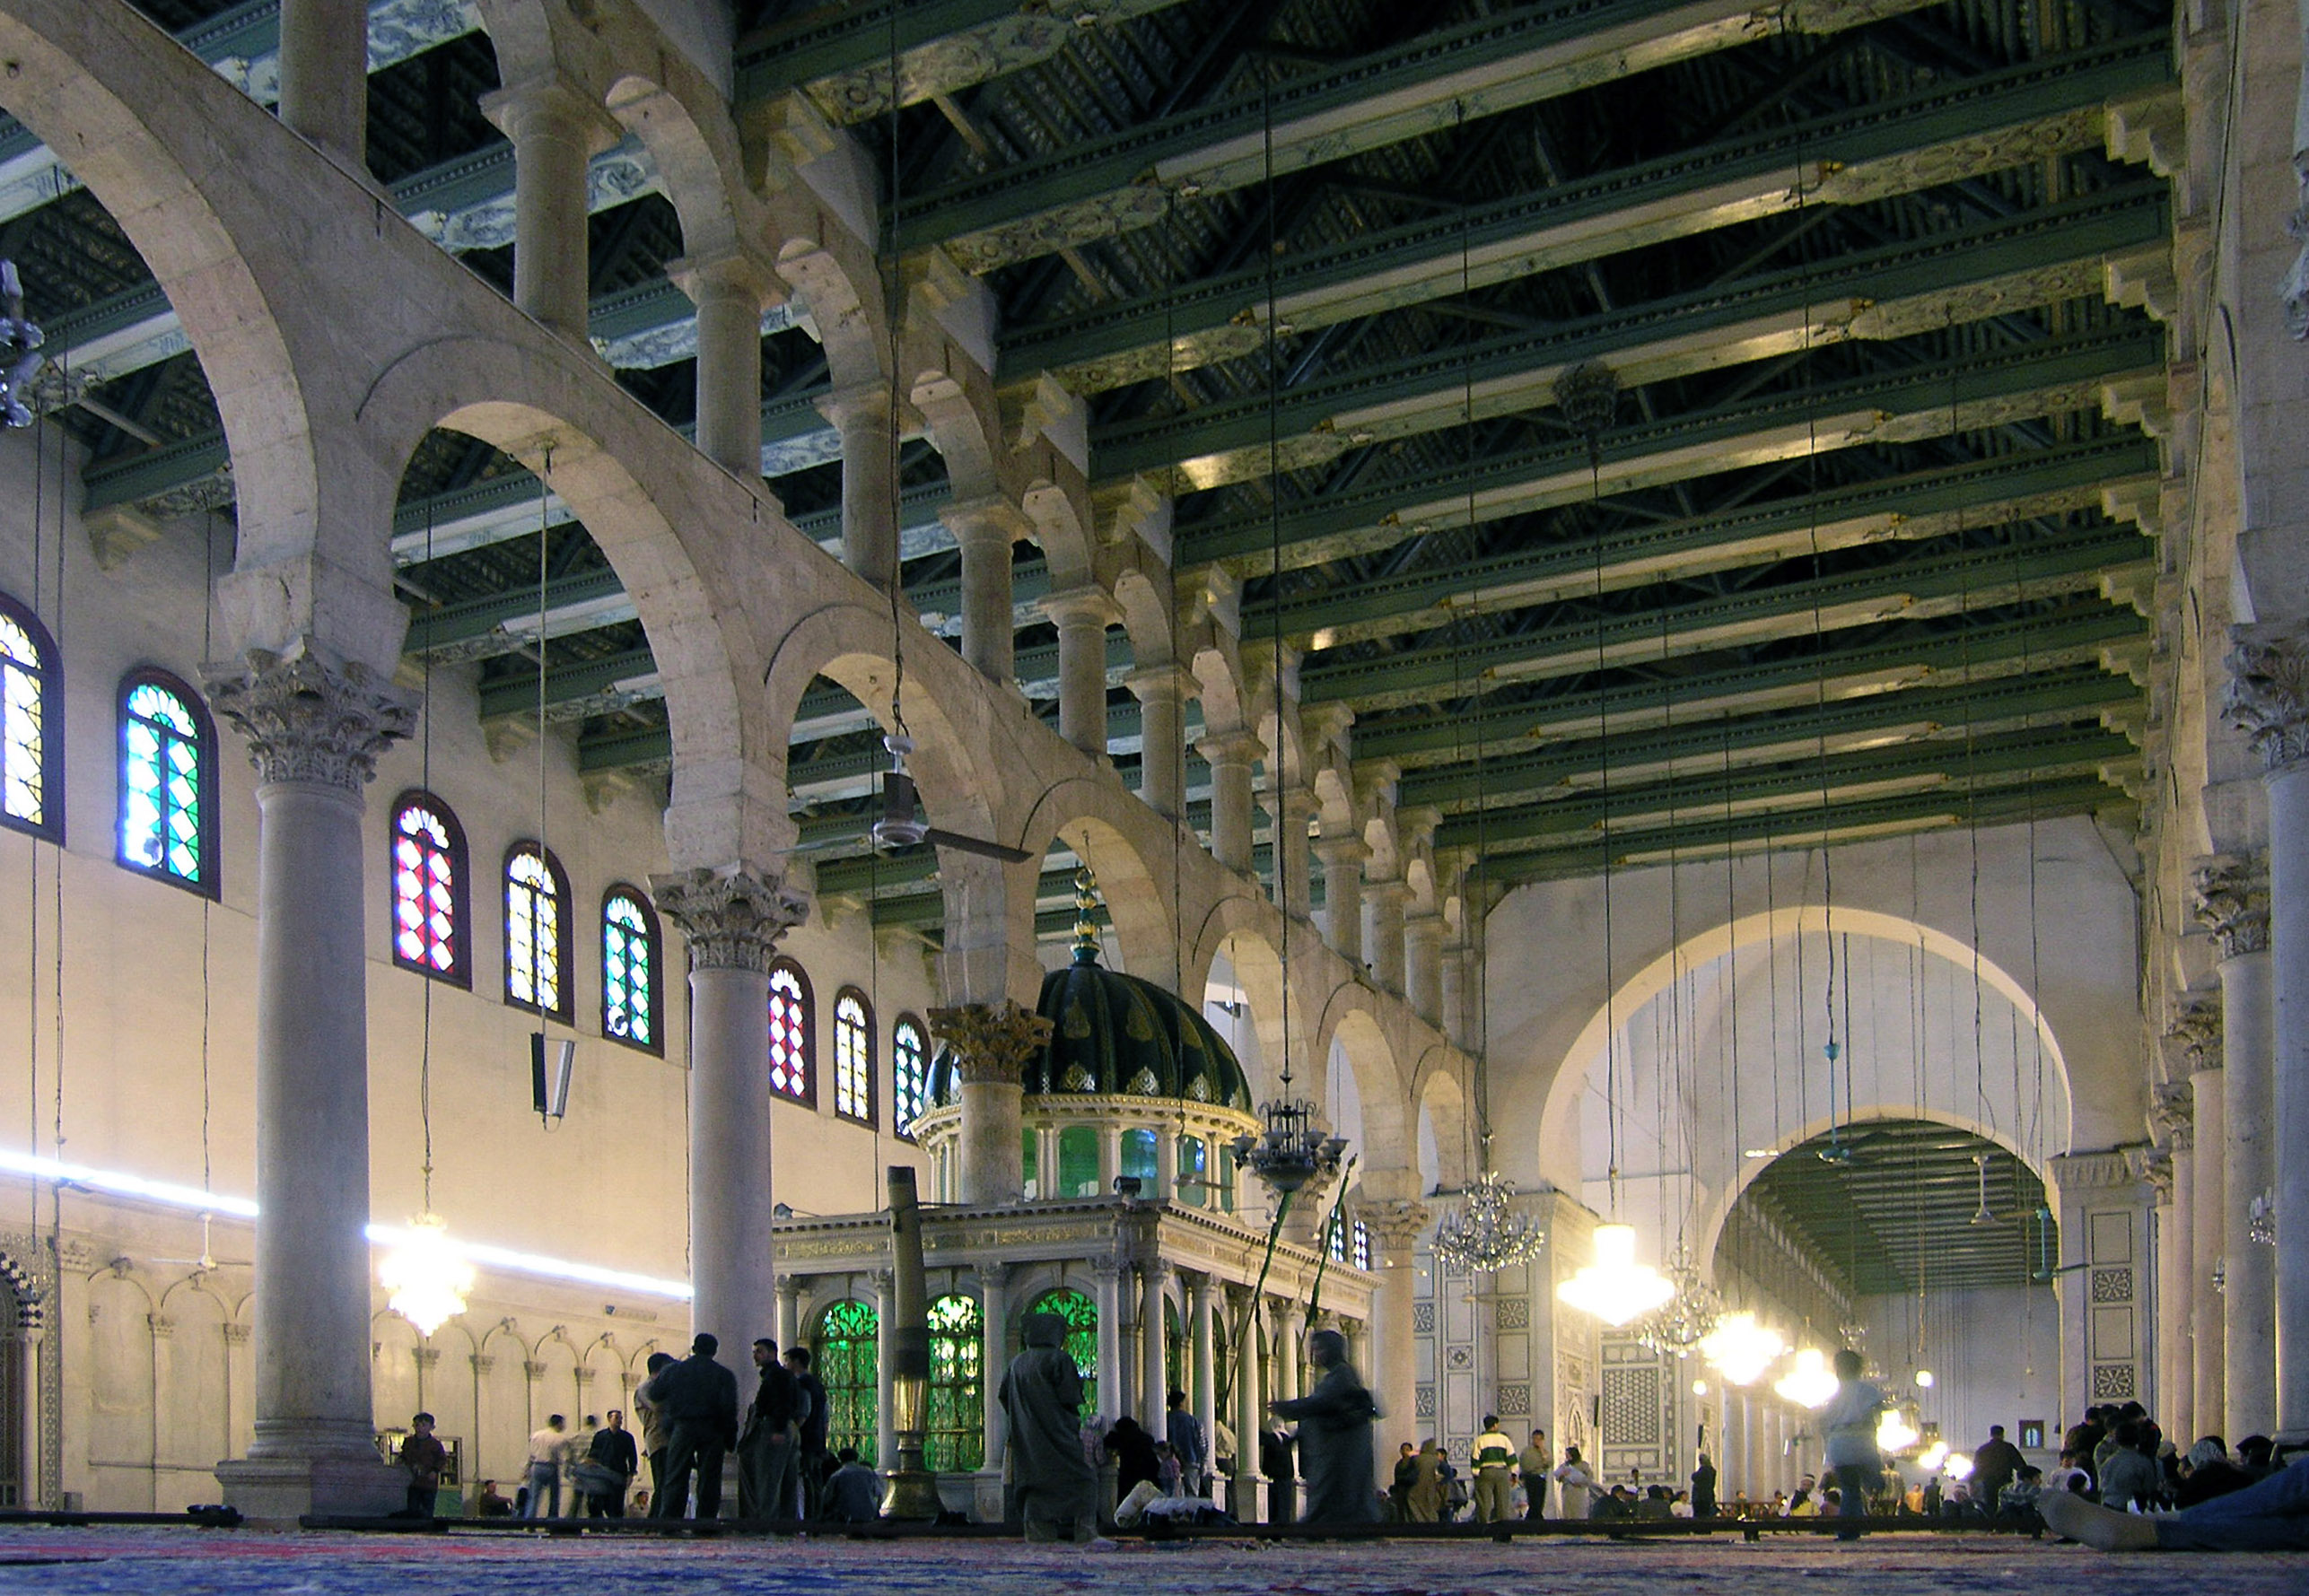 View of the Prayer Hall, Great Mosque of Damascus, photo: Seier+Seier, CC BY 2.0